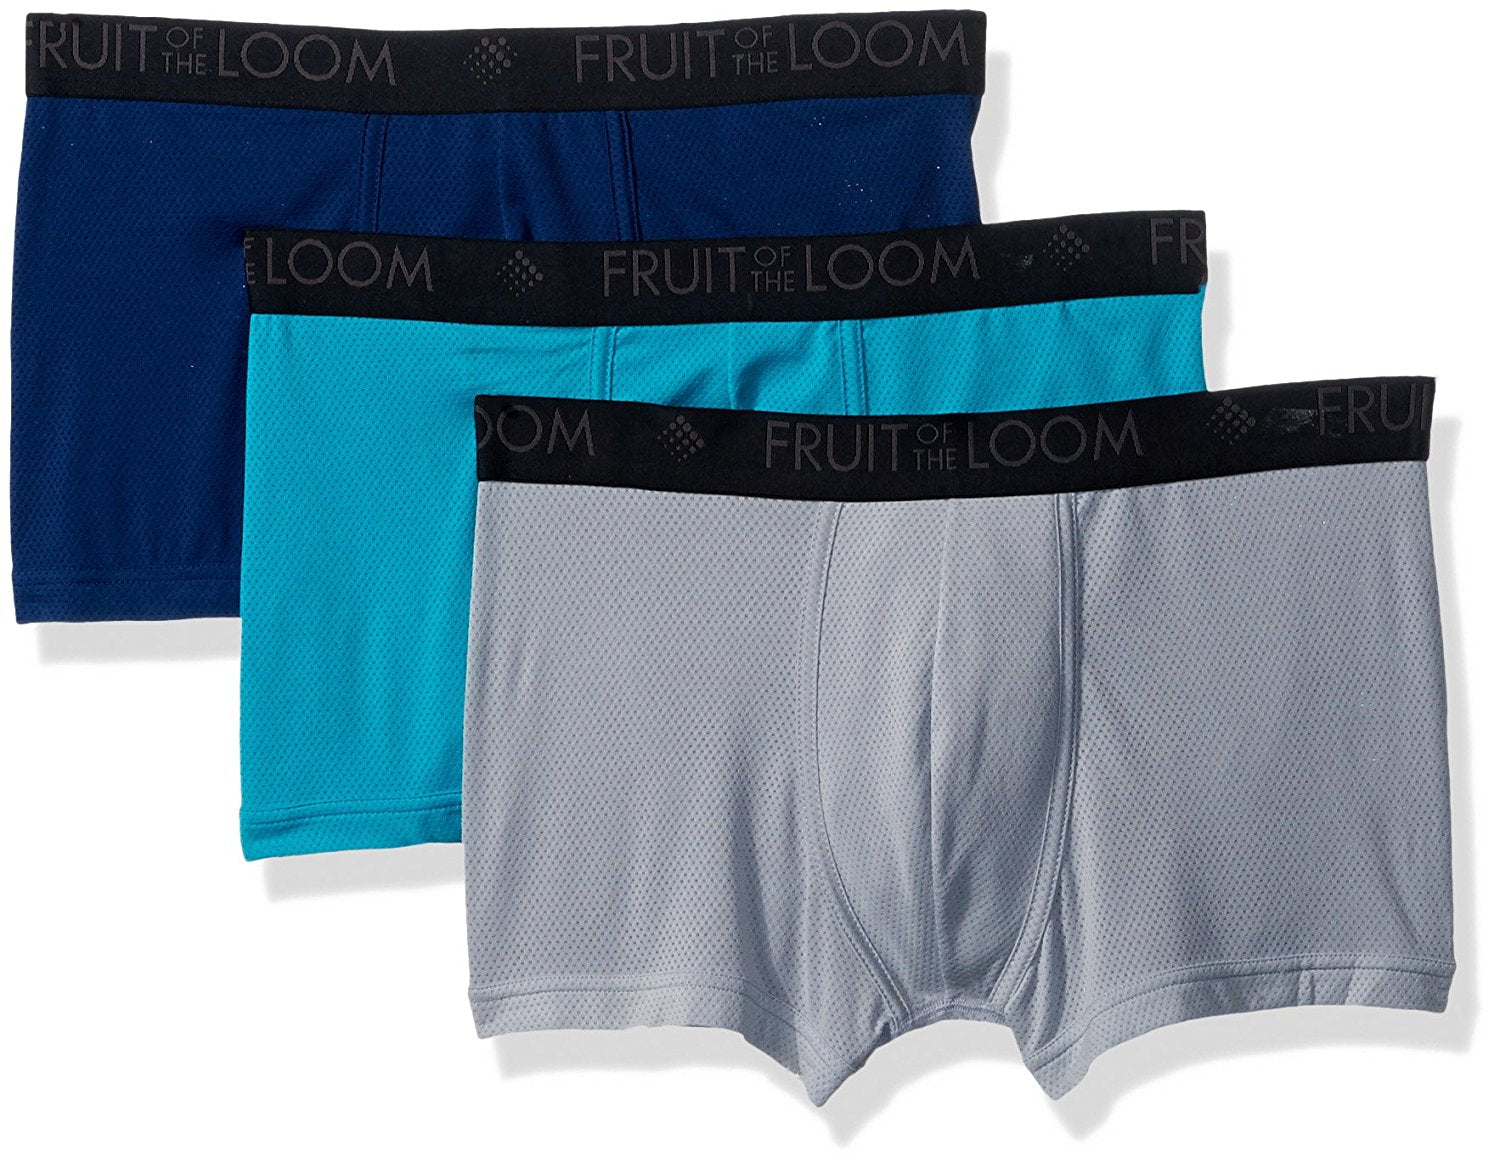 Fruit of the Loom Mens 4-Pack Breathable Micro Mesh Assorted